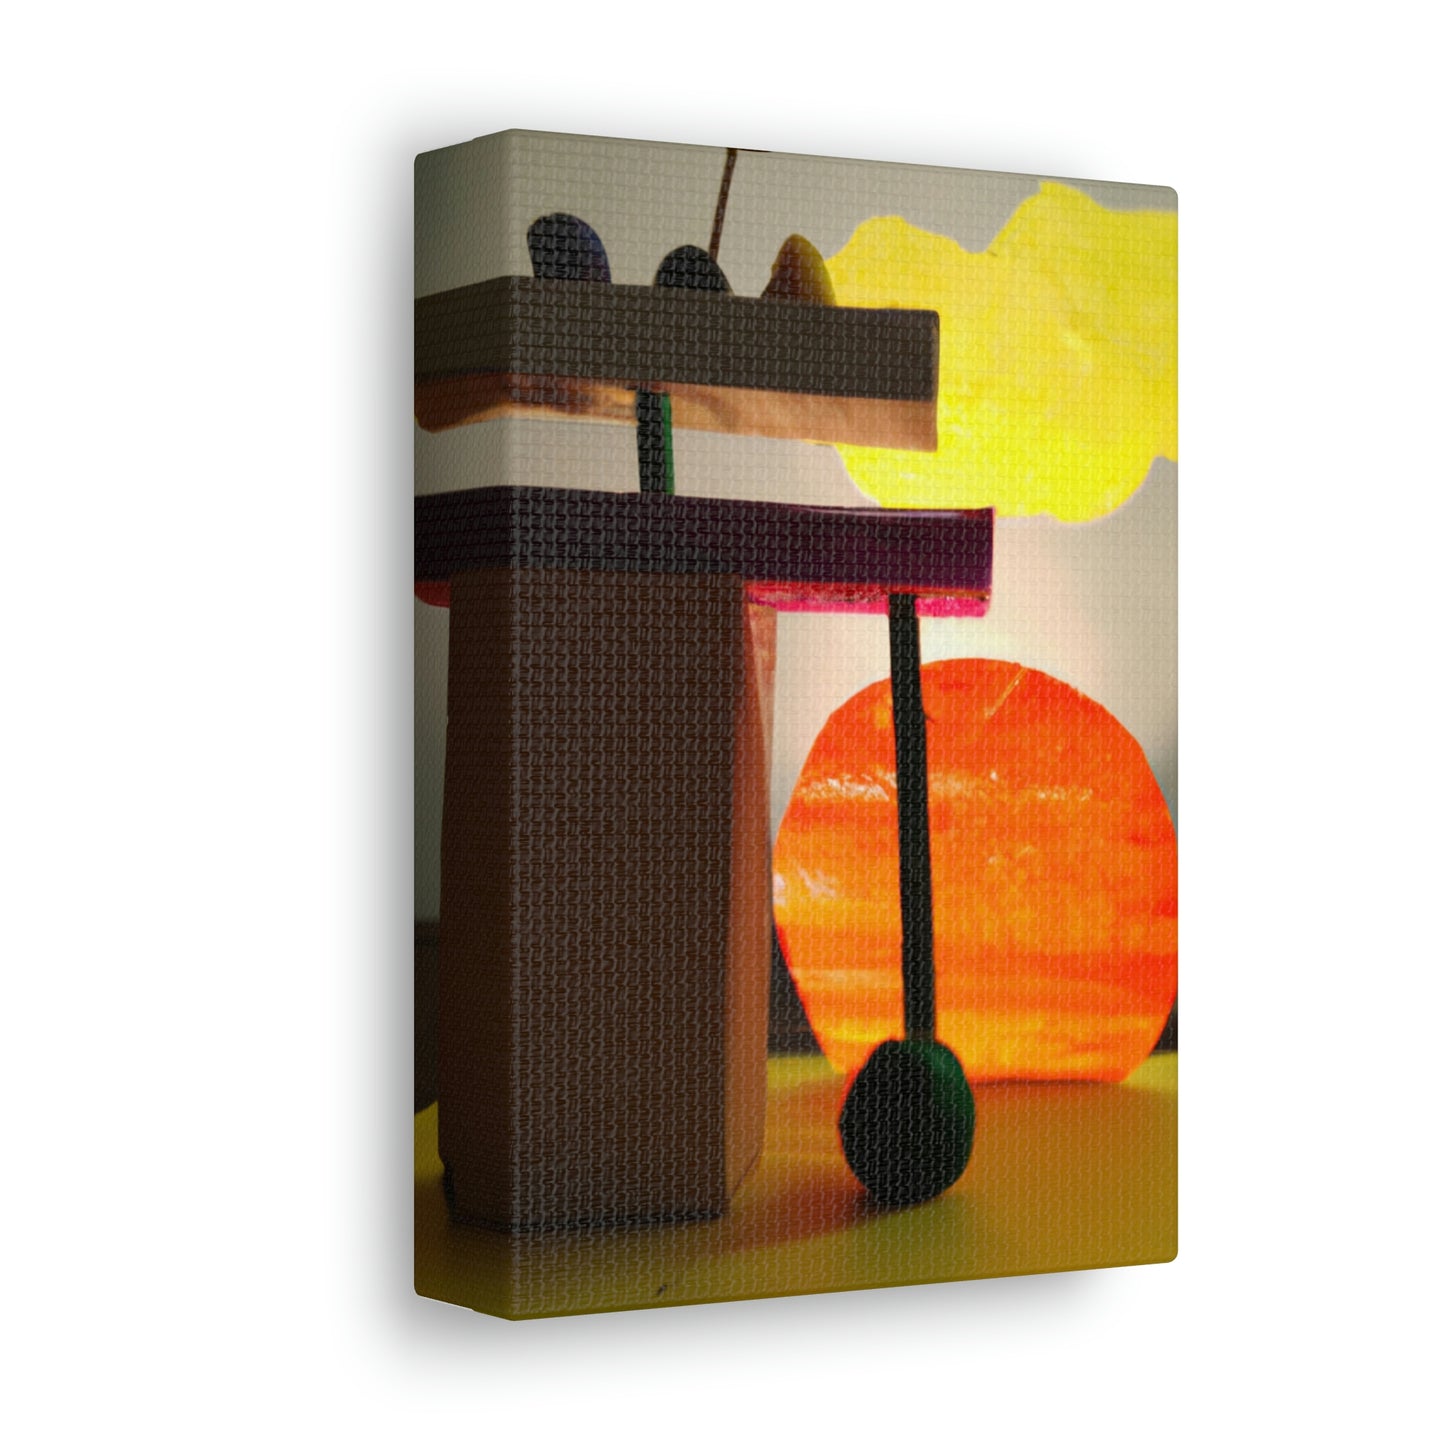 "Sunset Sculpture from Found Objects" - The Alien Canva.